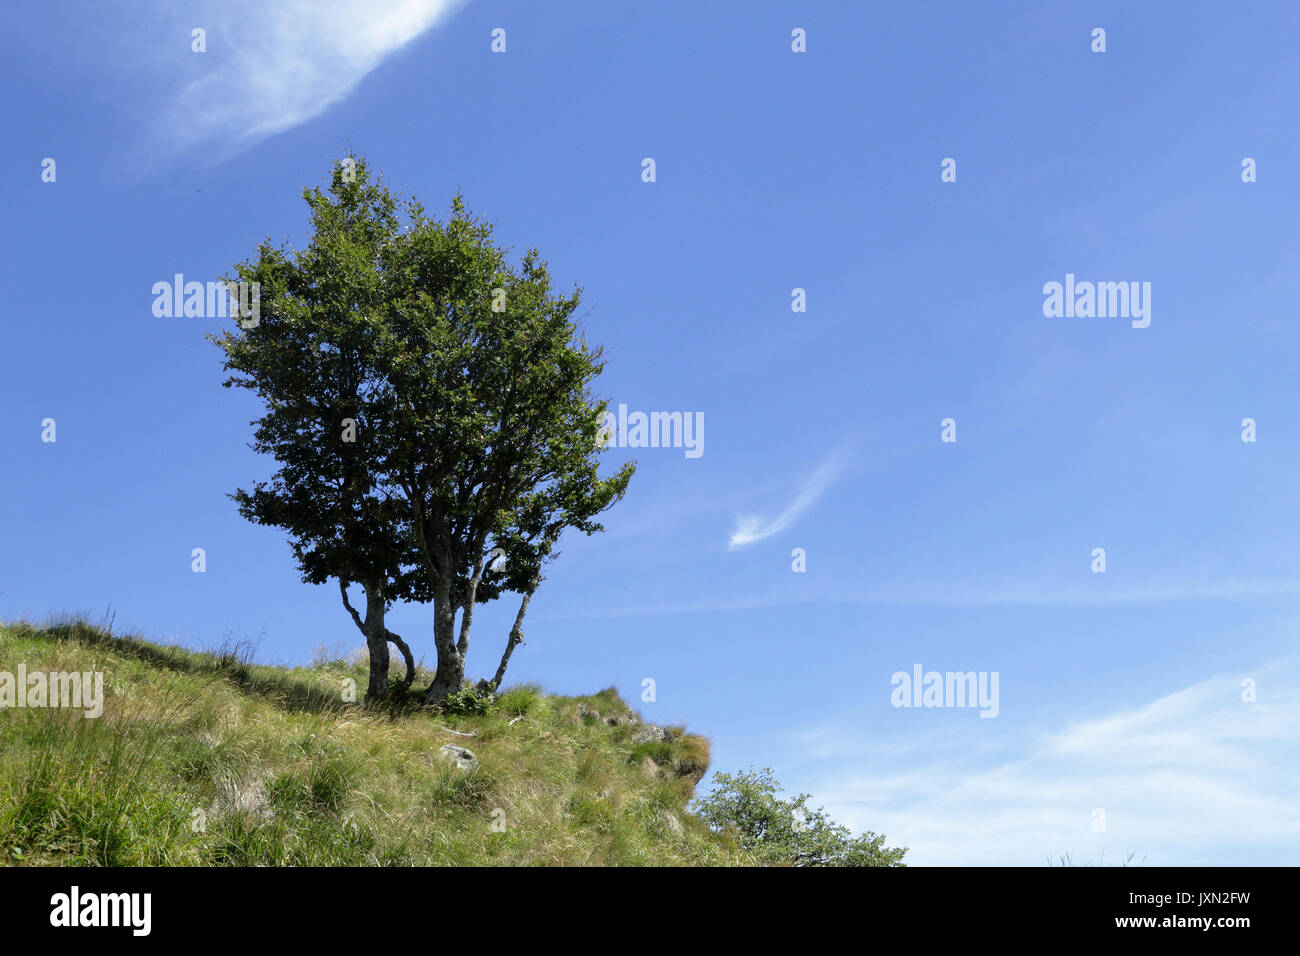 A lone round tree on the grass standing out in the blue sky on a green hill in the Alps mountains, Vigezzo Valley, northern Italy Stock Photo